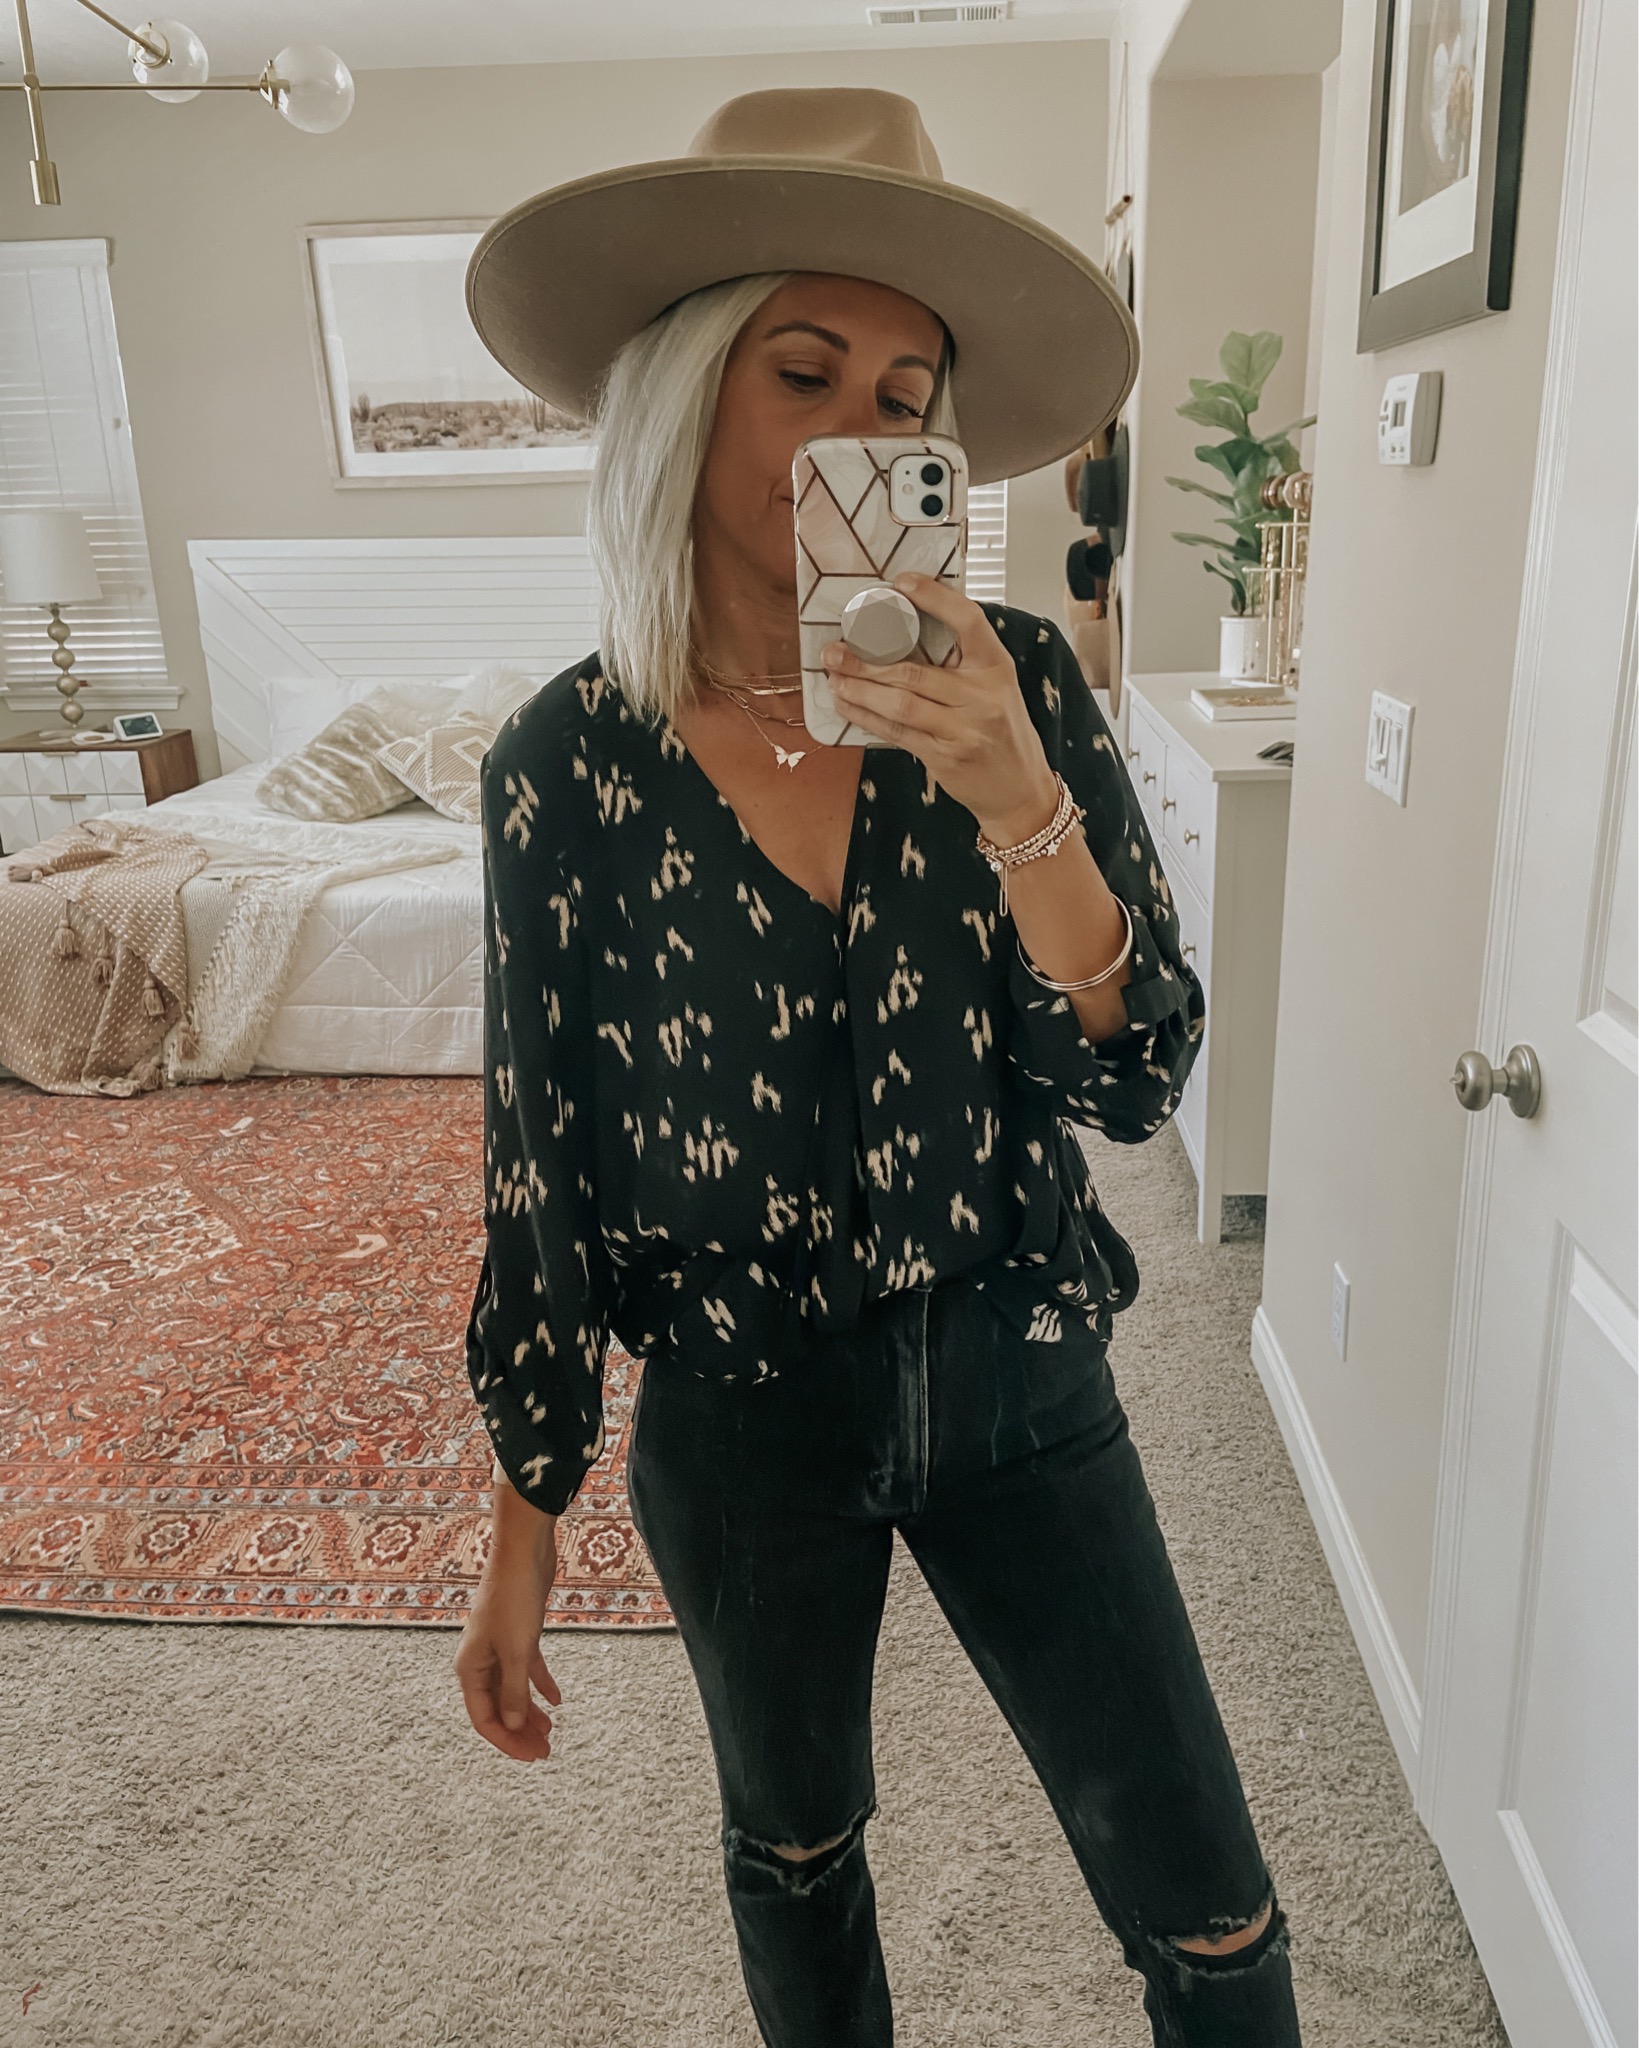 NORDSTROM SALE 1ST TRY-ON-Jaclyn De Leon Style + sharing my first in store try-on of the nordstrom sale + what I plan on ordering online